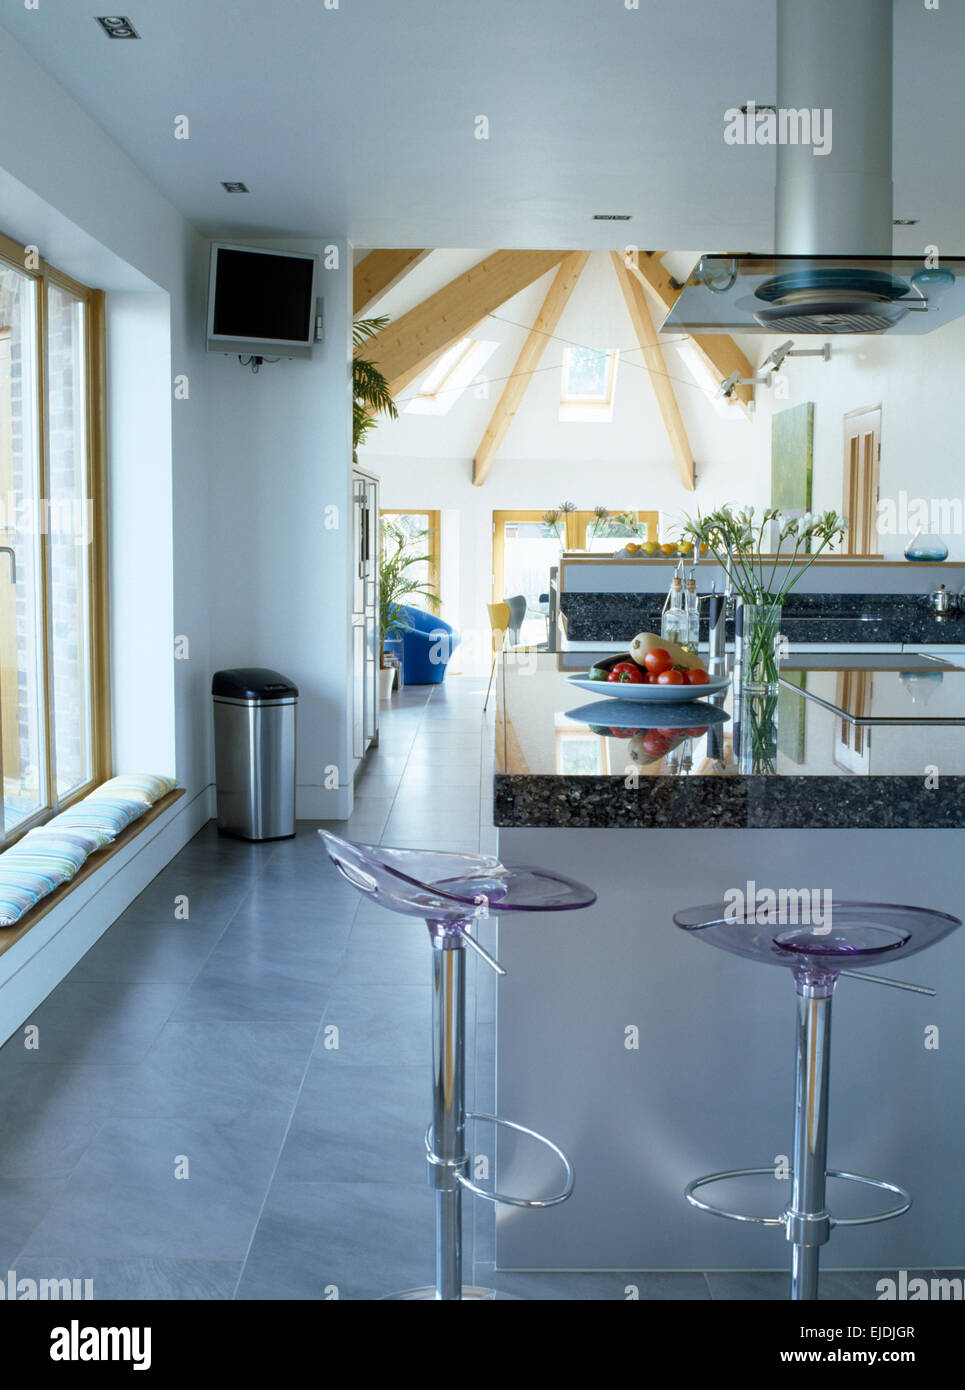 Perspex+chrome stools at breakfast bar in modern open plan kitchen Stock Photo